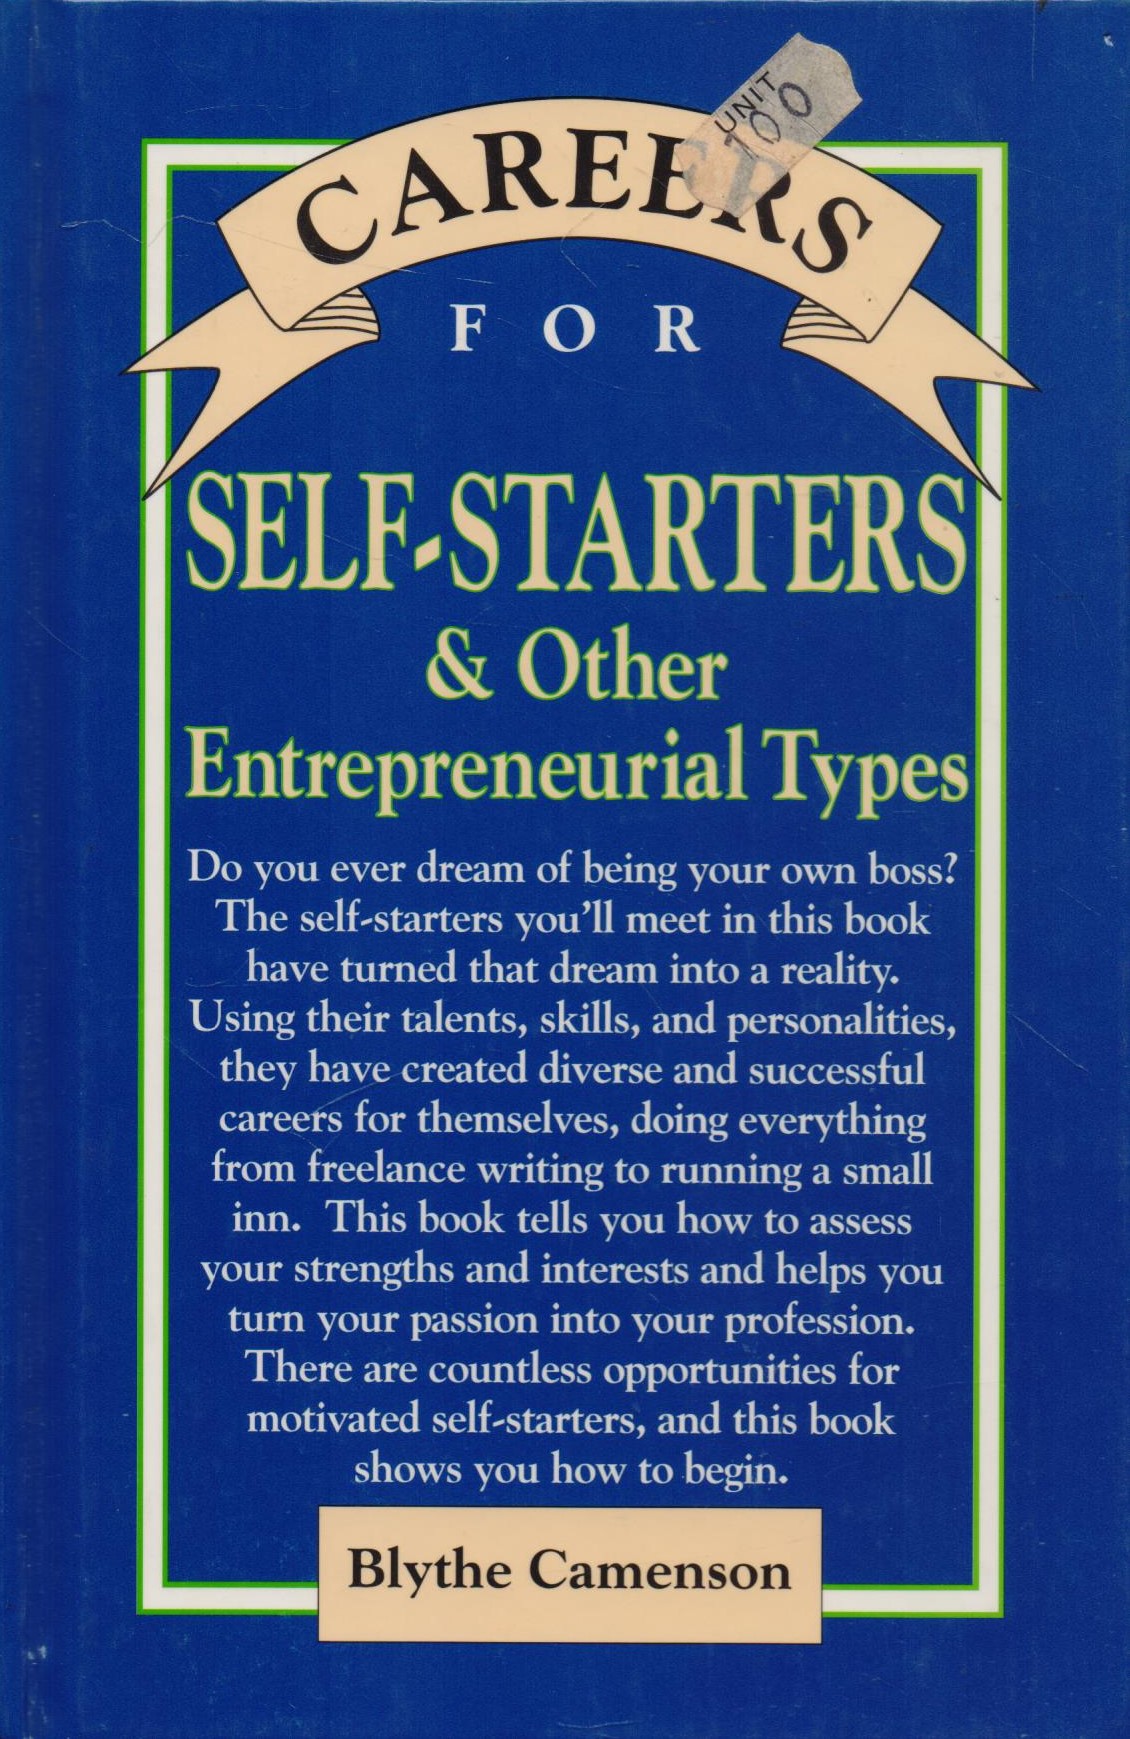 Careers for self-starters&Other Entrepreneurial Types Blythe Camenson